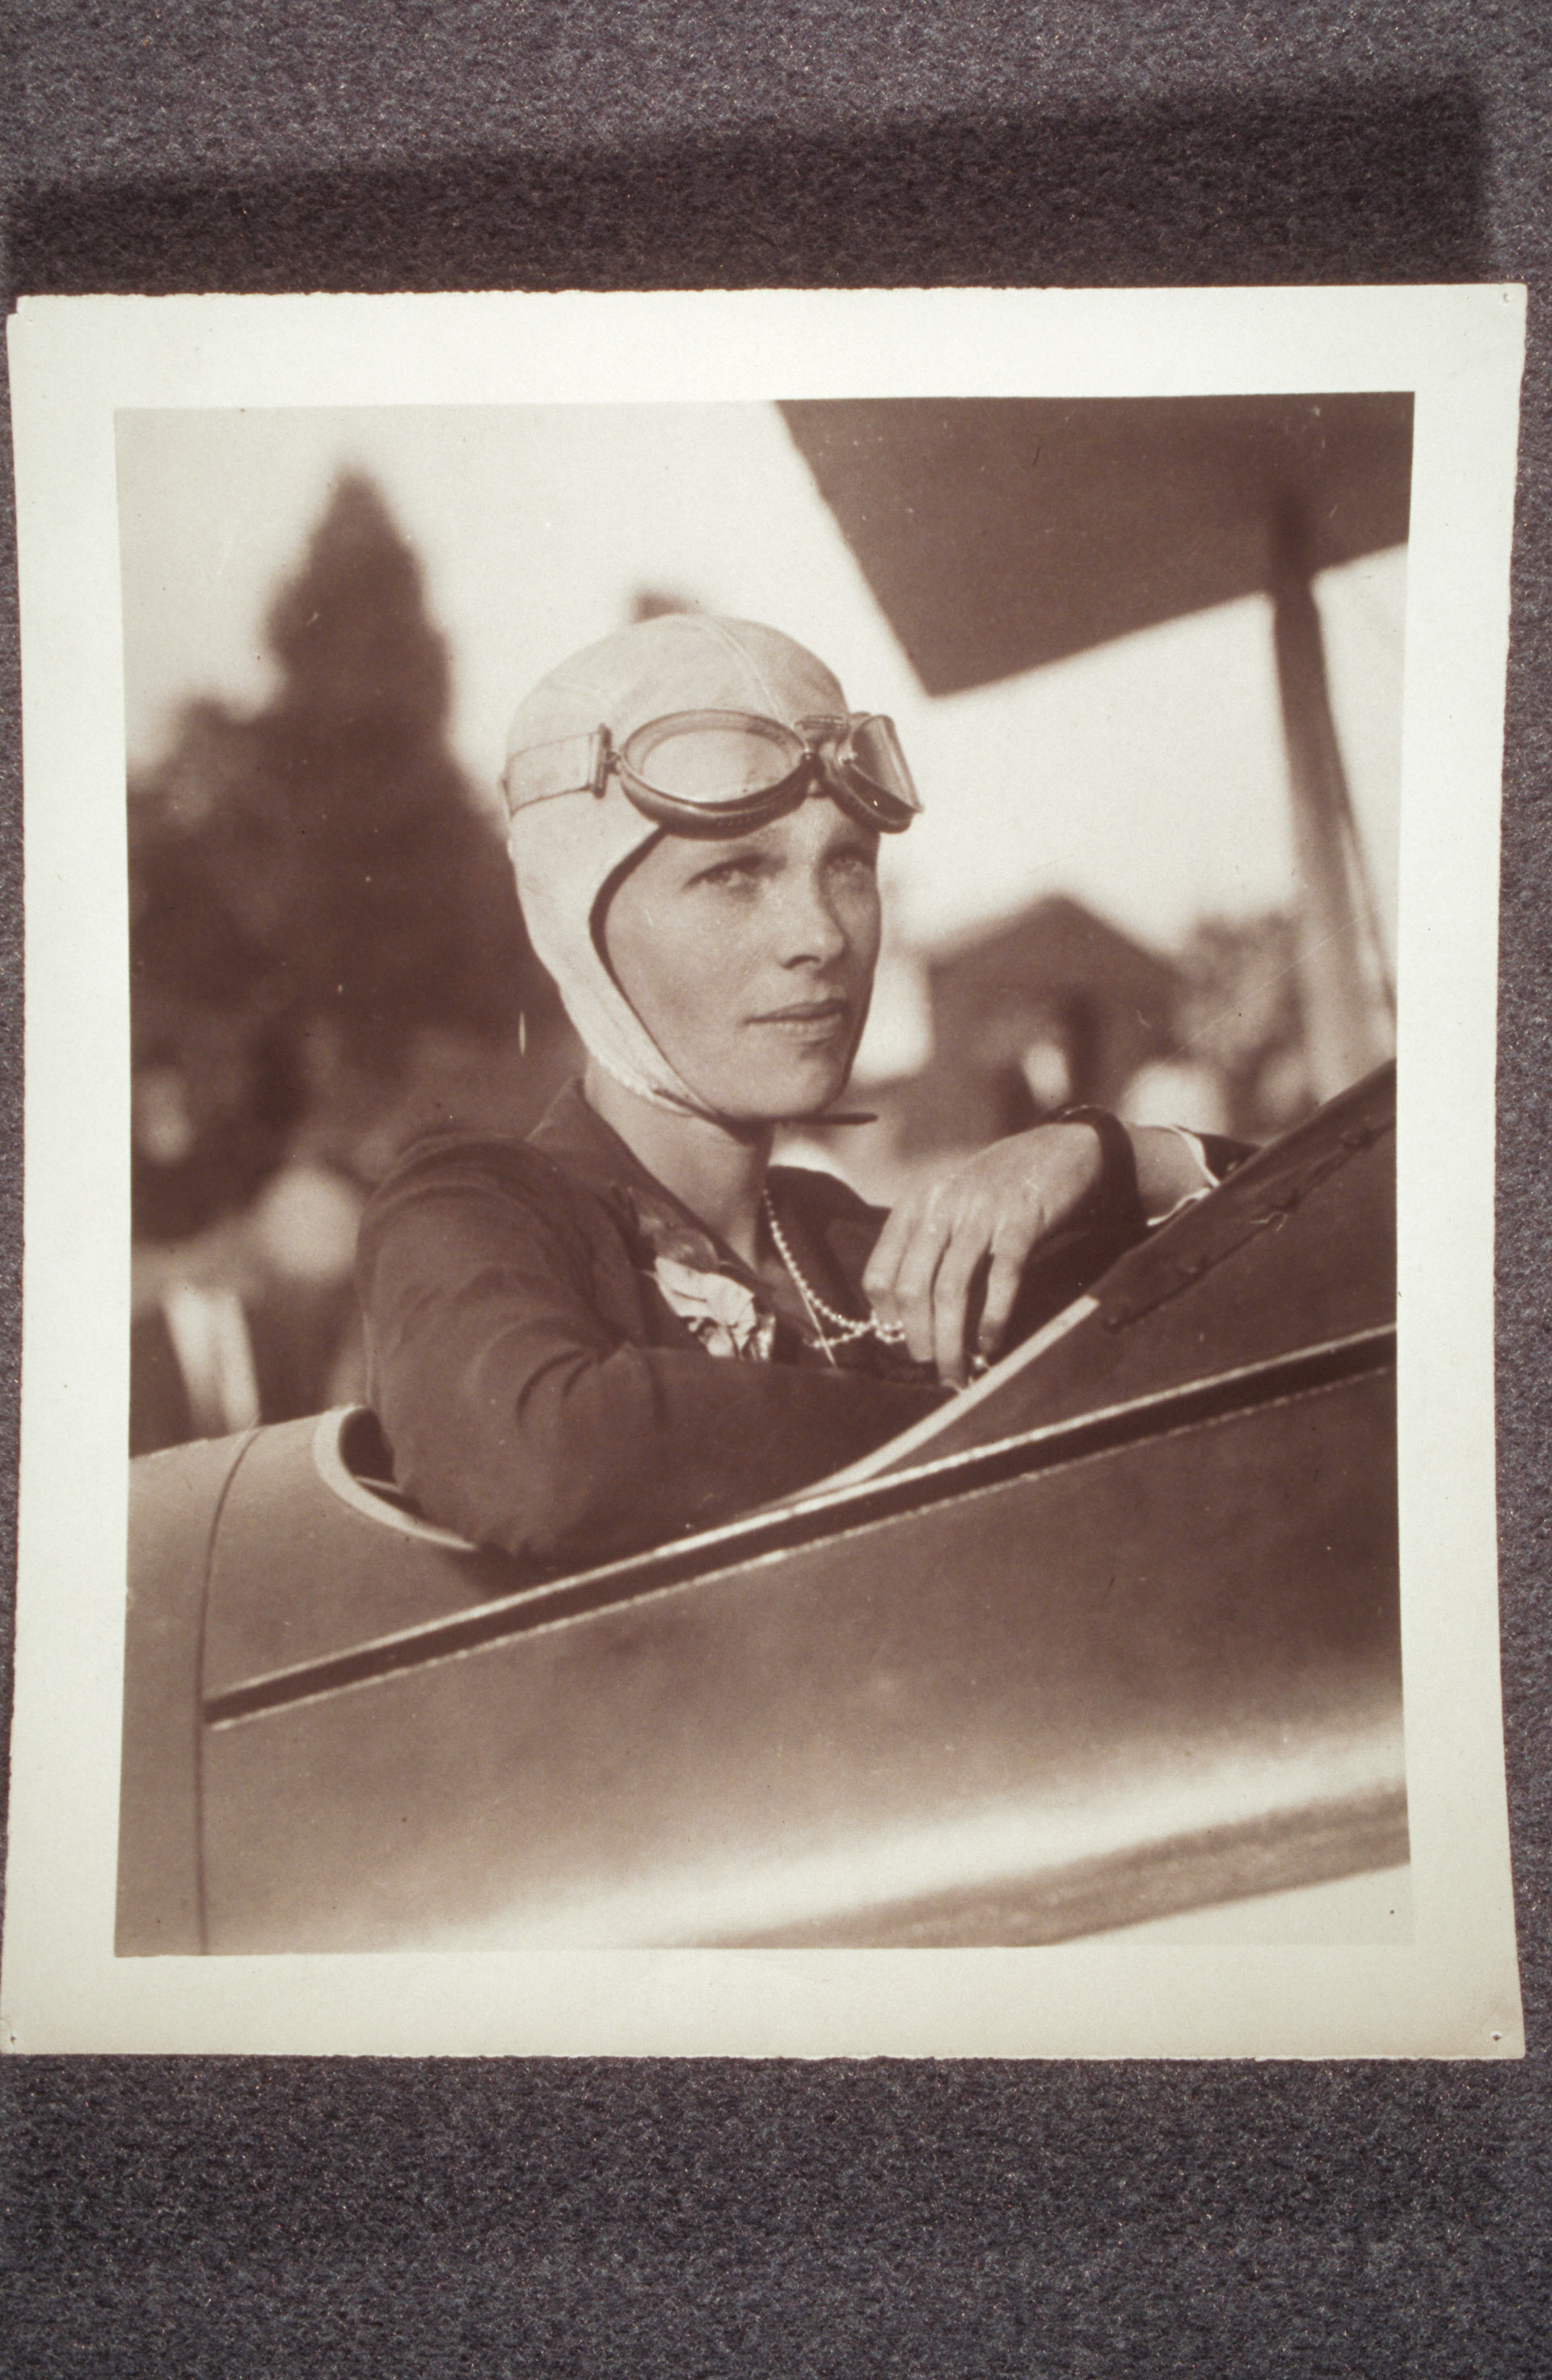 Amelia Earhart | Radcliffe Institute for Advanced Study at Harvard